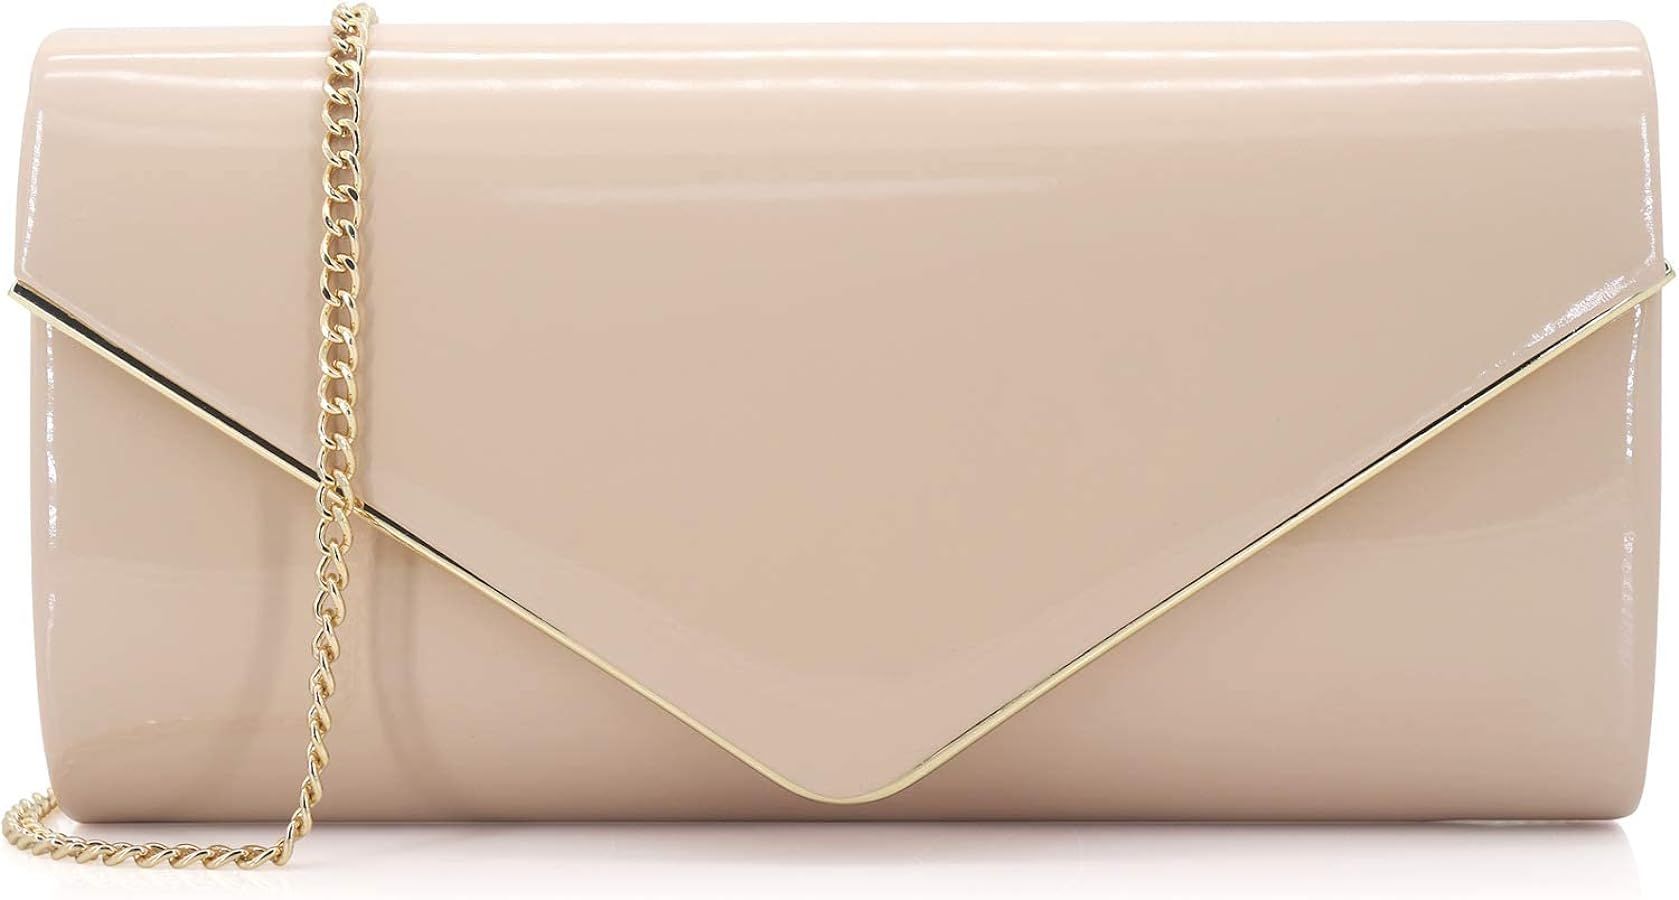 MUDUO Patent Leather Envelope Clutch Purse Shiny Candy Foldover Clutch Evening Bag for Women | Amazon (CA)